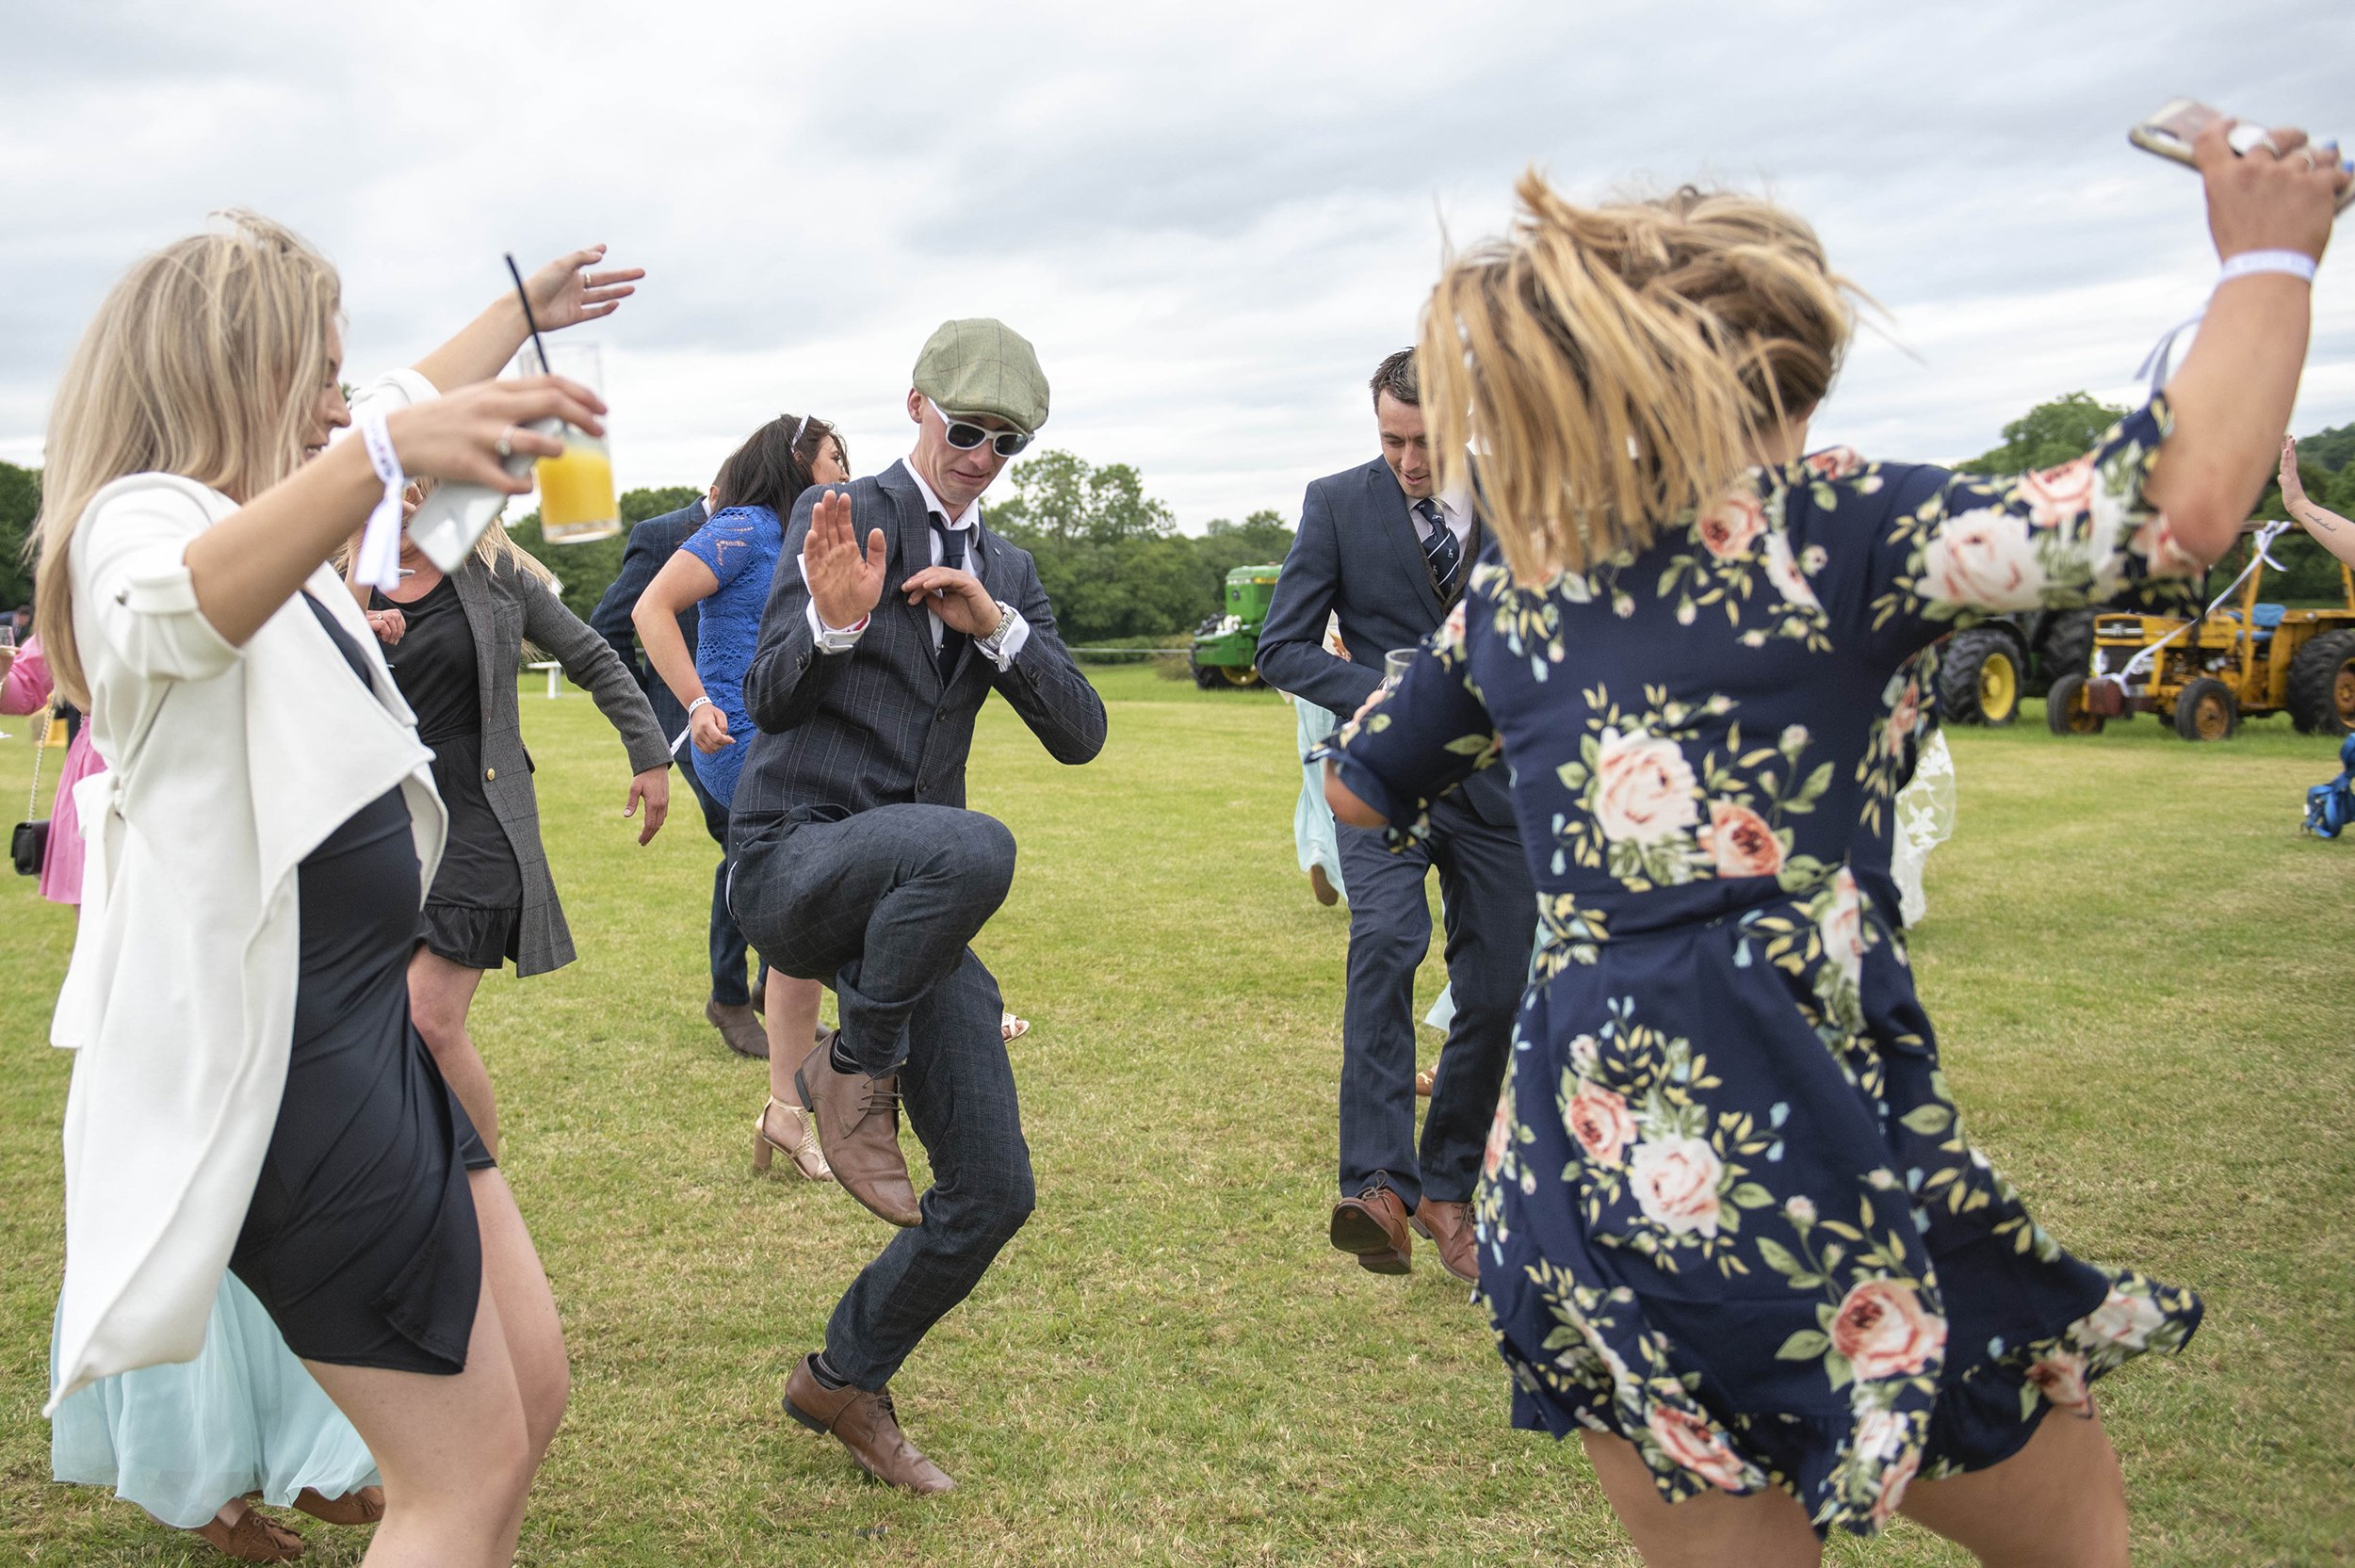 a group of wedding guests dancing at an outdoor wedding in clitheroe